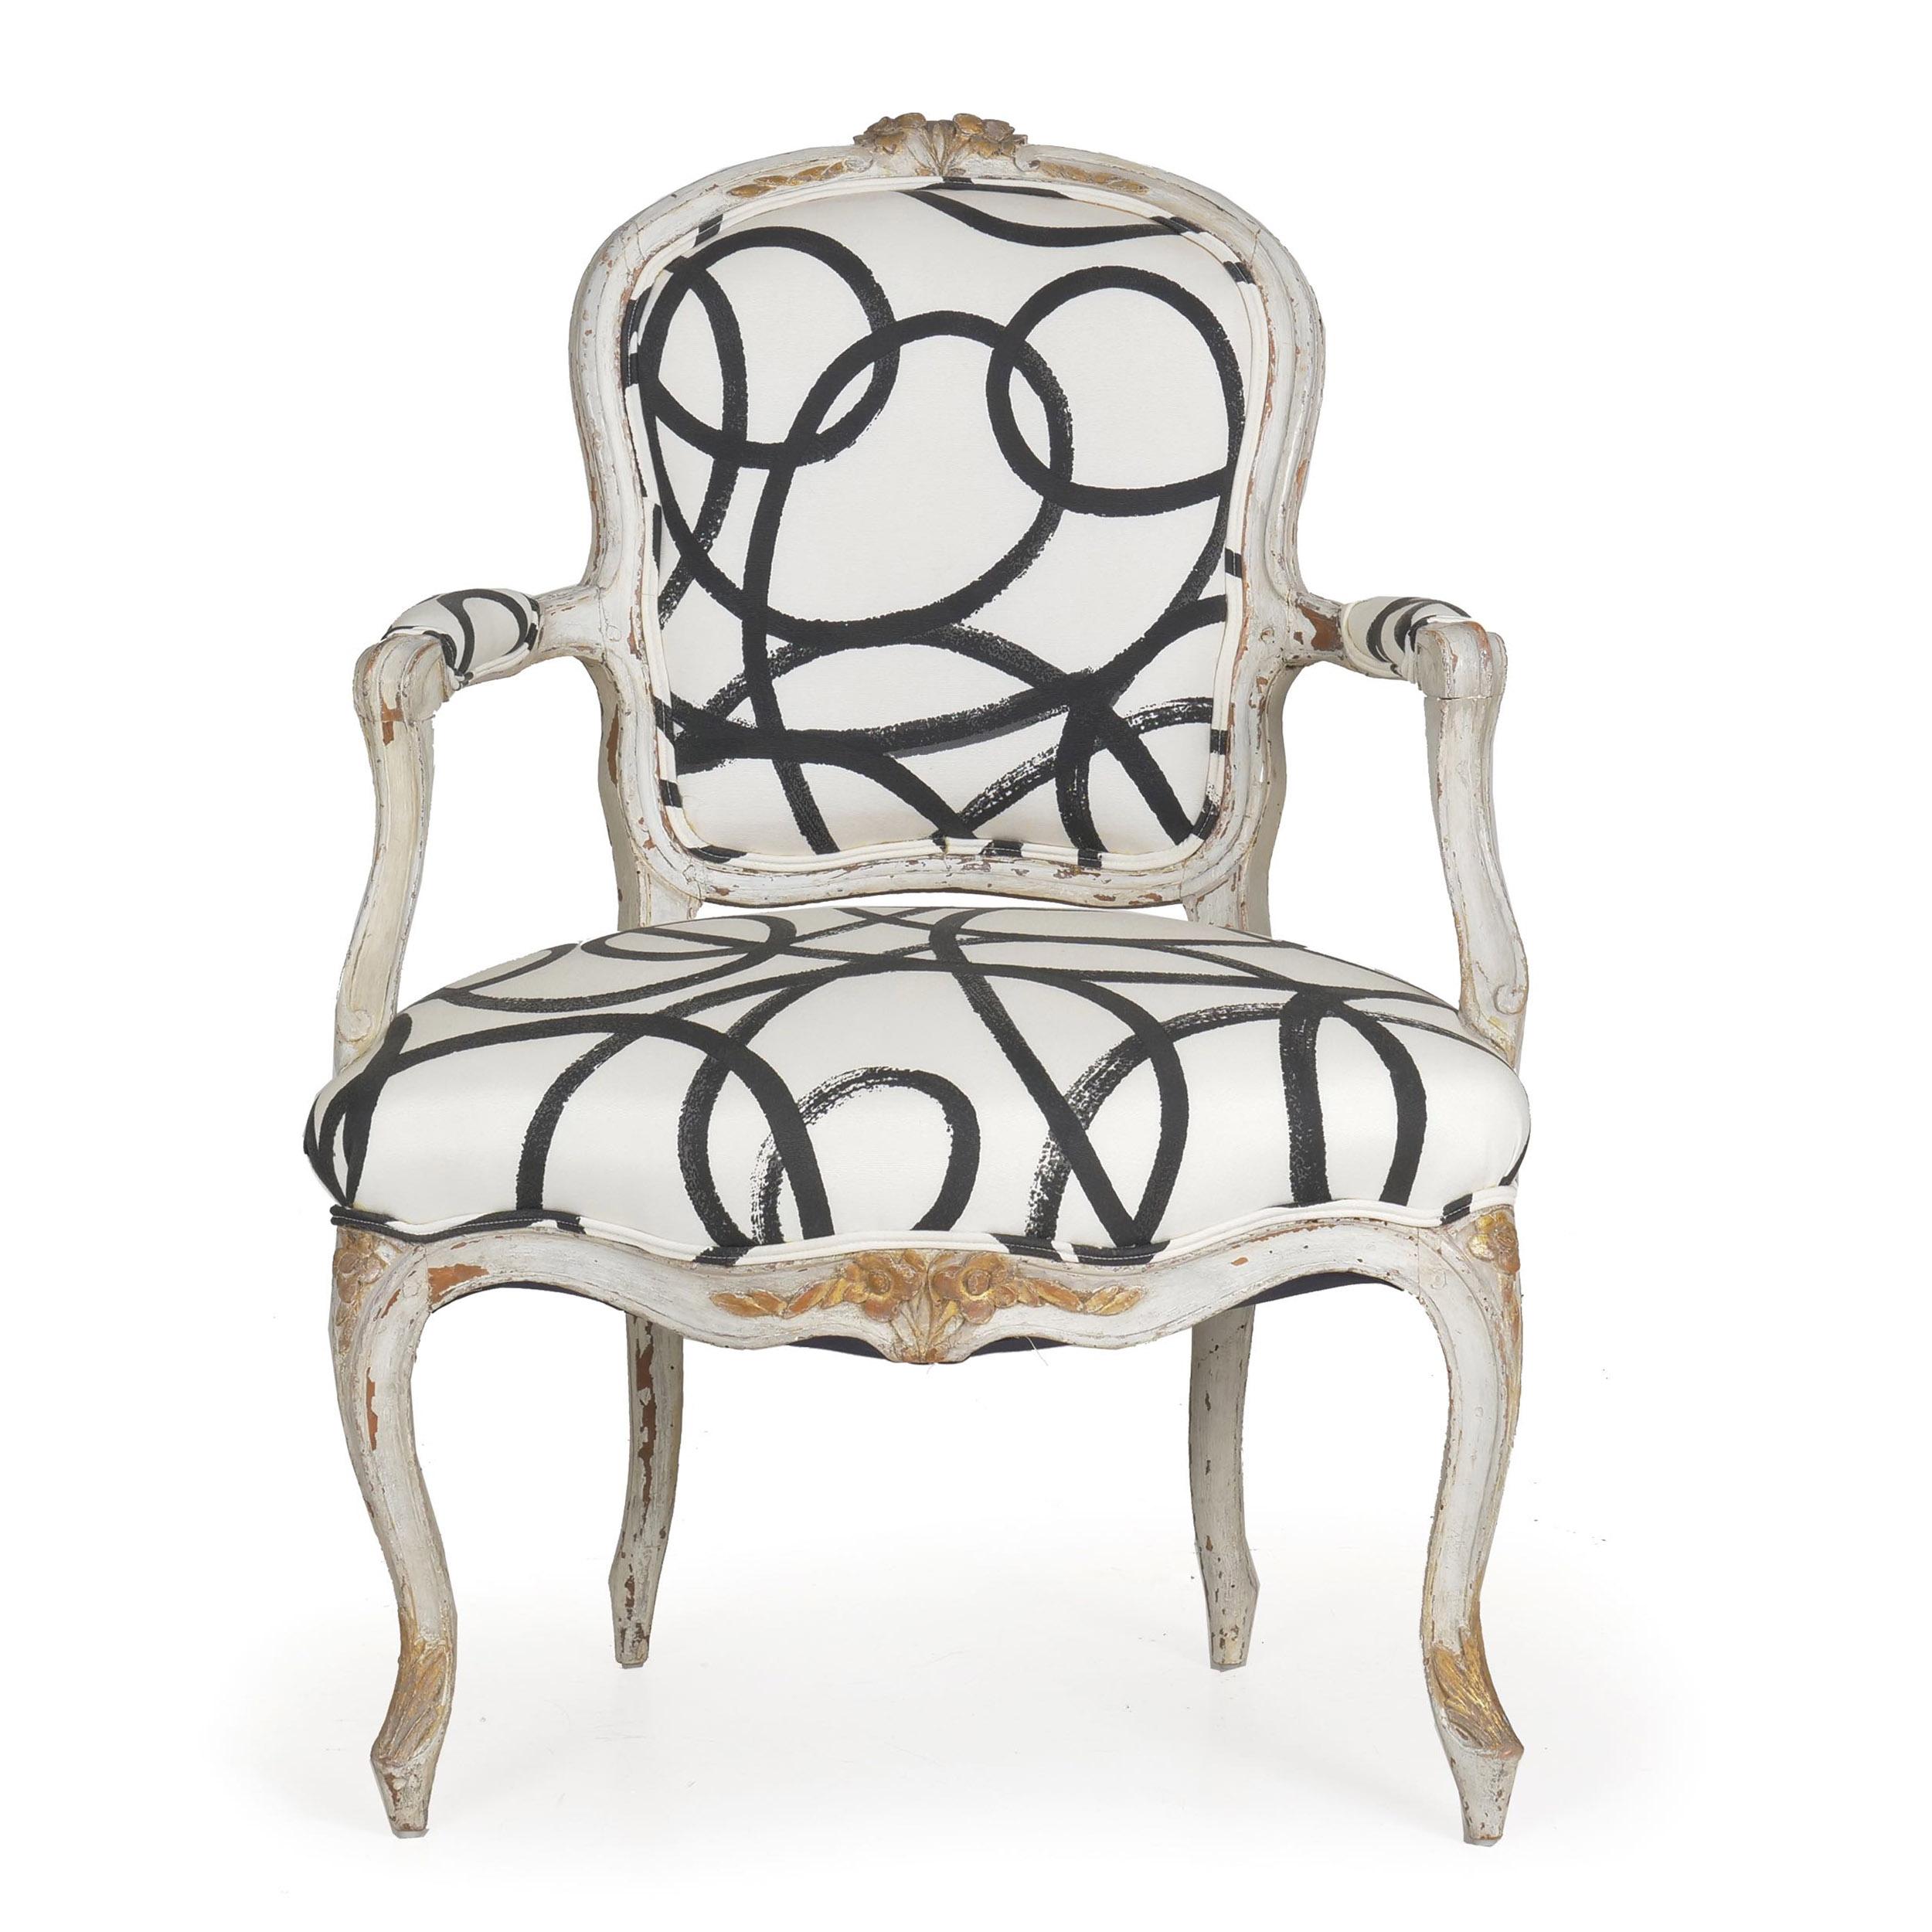 French Louis XV worn white-gray painted fauteuil
circa late 18th-early 19th century
Item # 008EXP26I-1 

A gorgeous painted fauteuil of the Louis XV period, this delightful chair has a historical surface of many layers, having been painted and